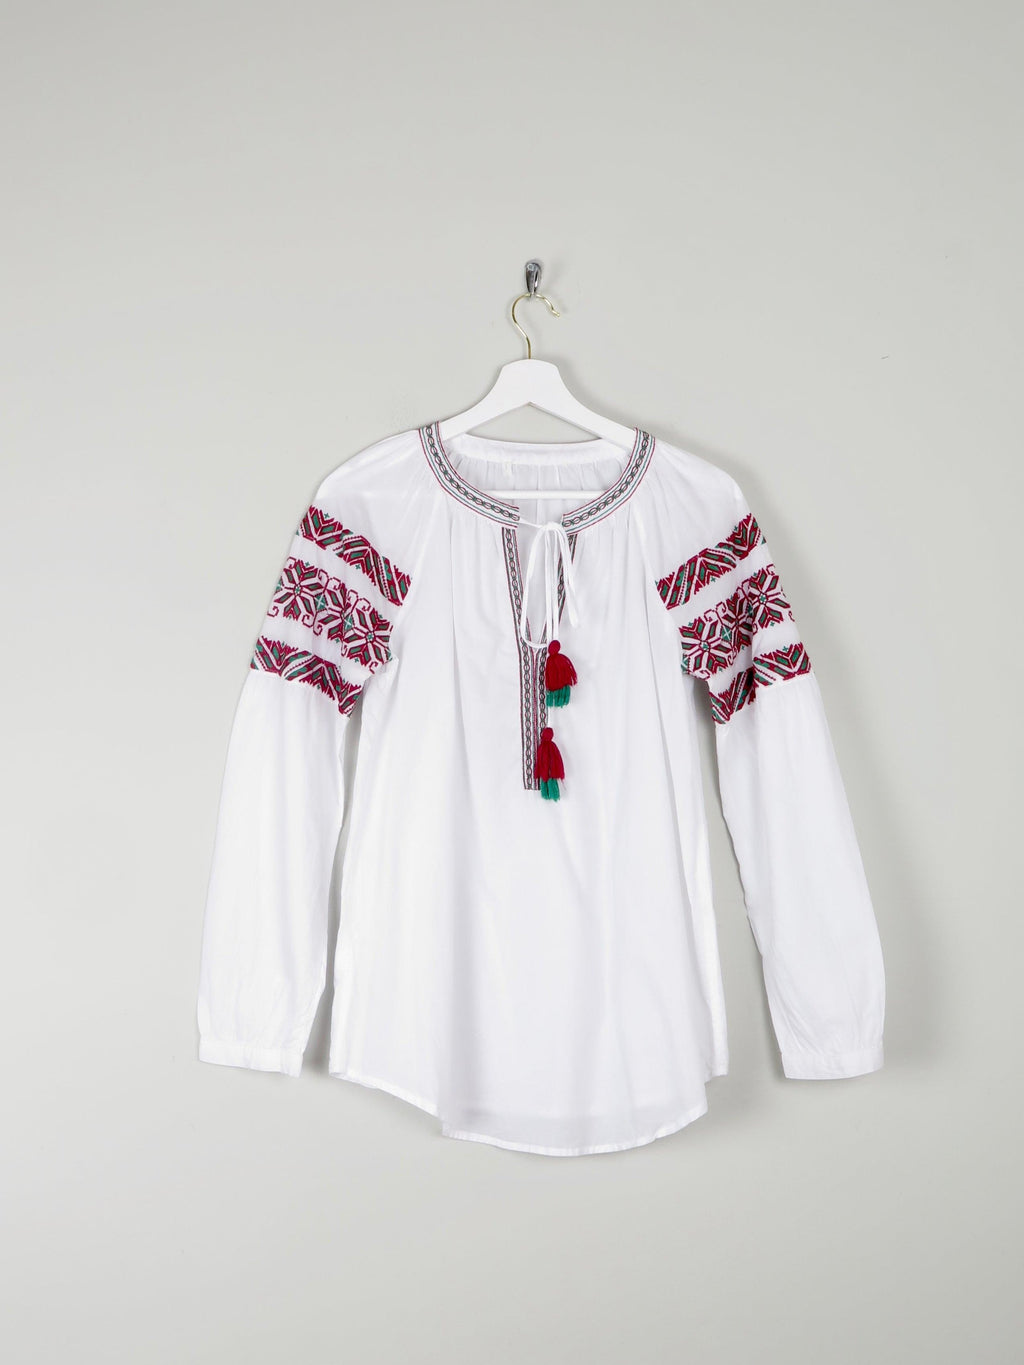 Women's White Peasant Blouse With Embroidery & Tassels S/M - The Harlequin